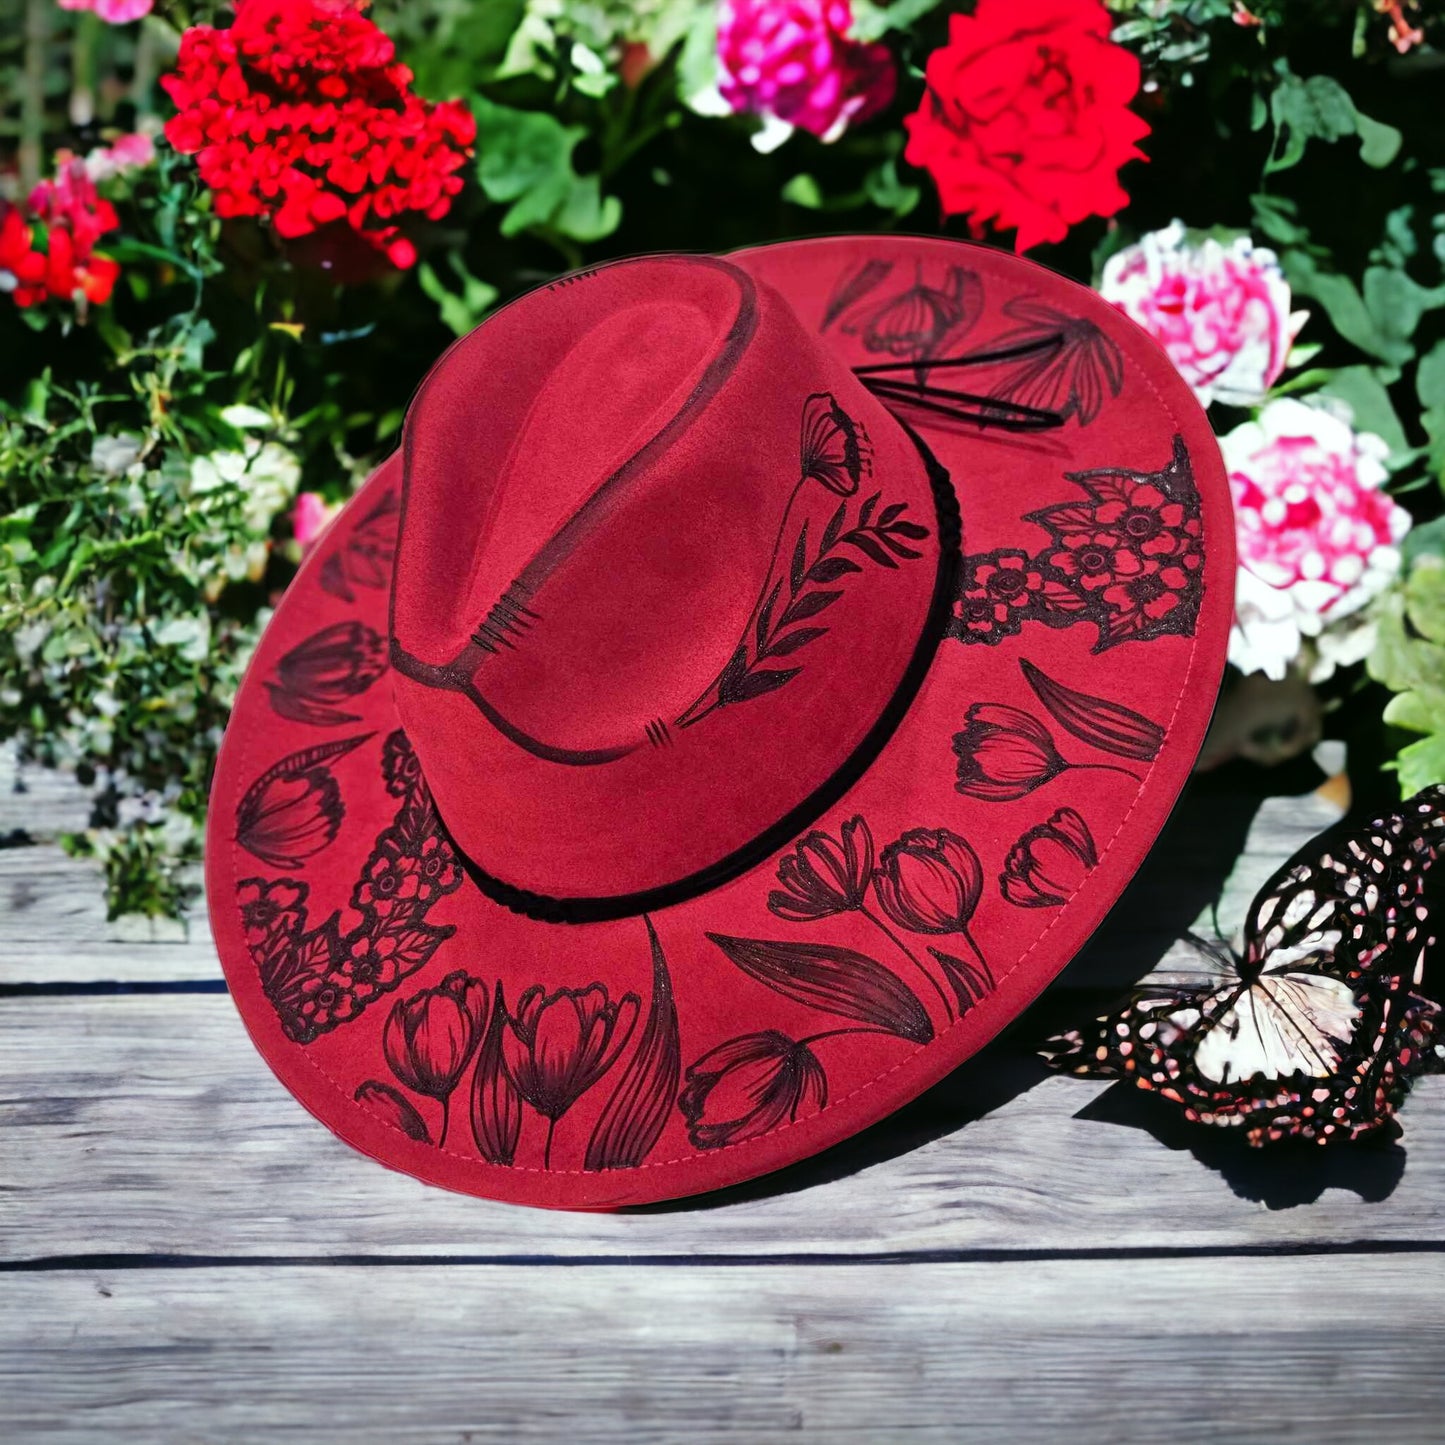 Everly Blooms - Burned Wide Brim Hat